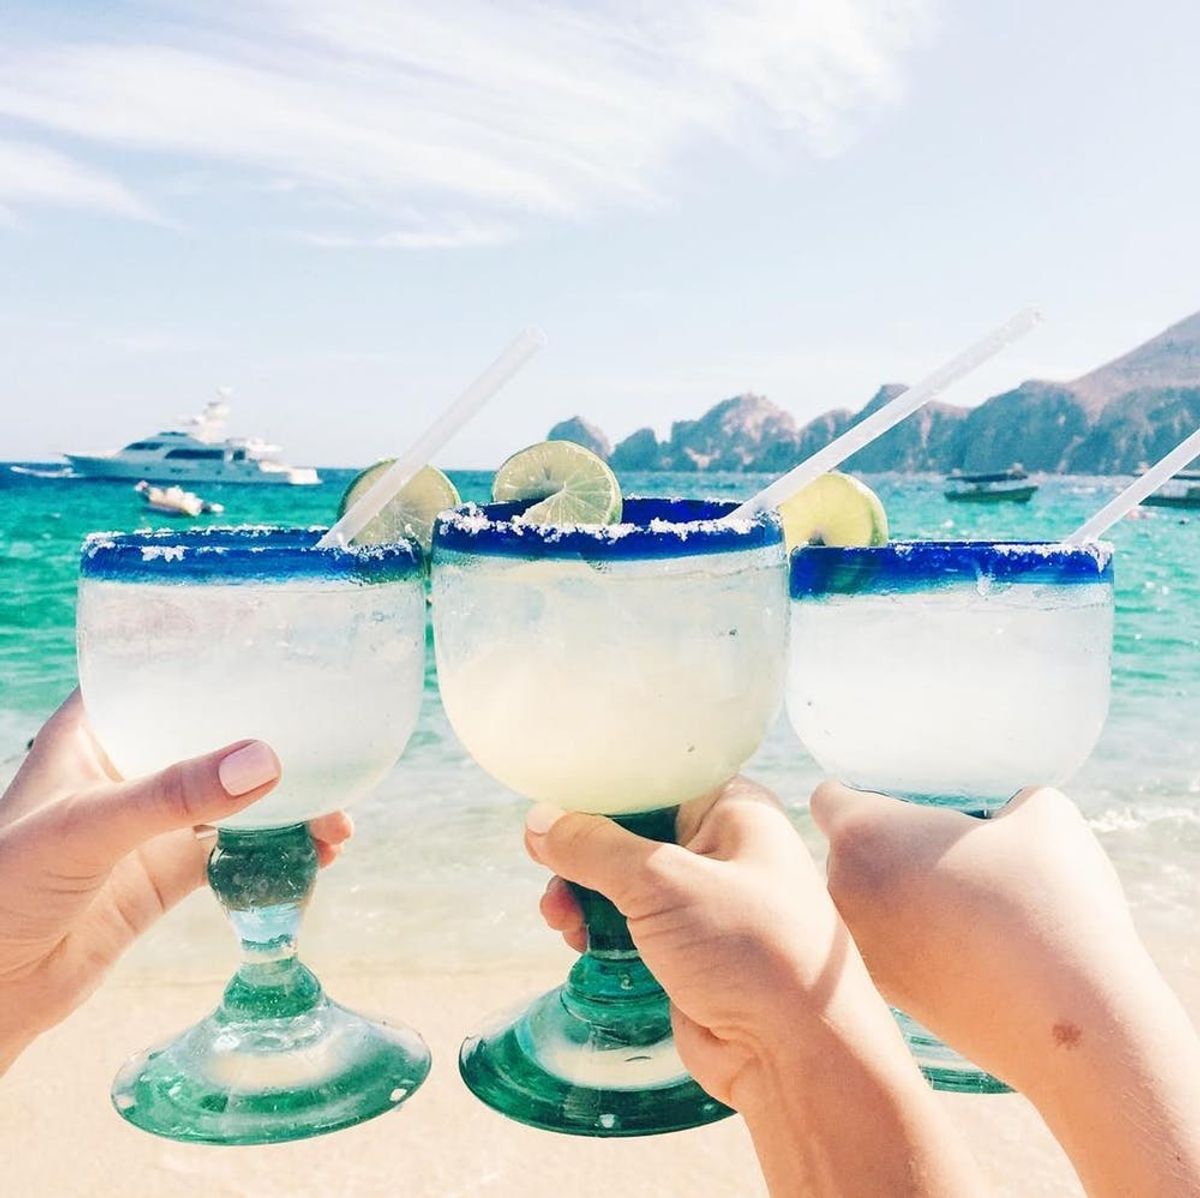 Adios, Y’all! We’re Sending You on a Trip to Mexico